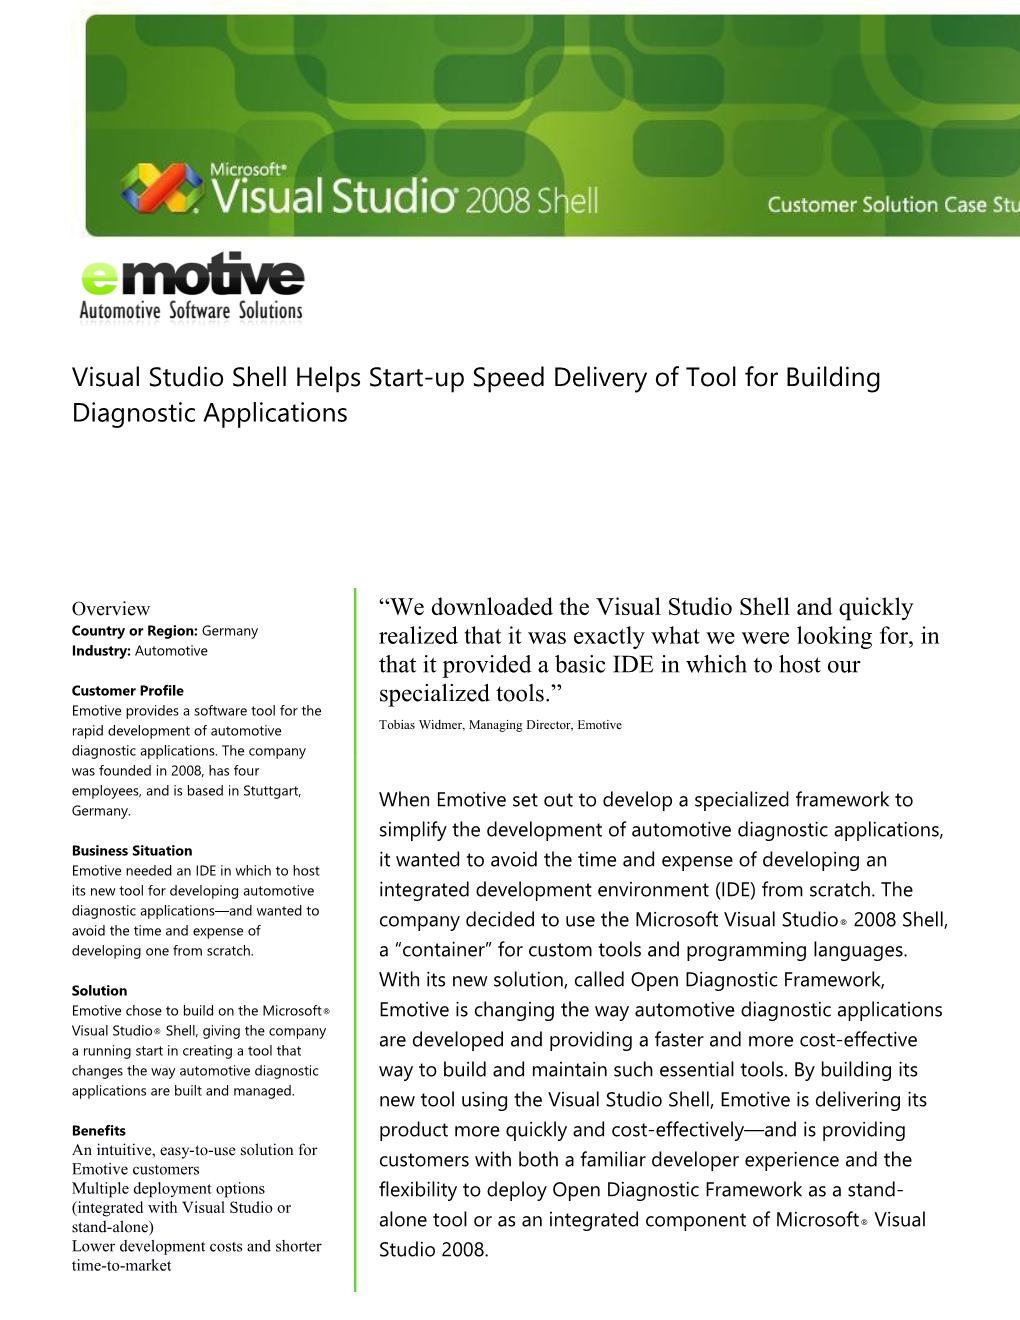 Metia 2008 Startup Uses Visual Studio Shell to Speed Delivery of Tool for Building XXX